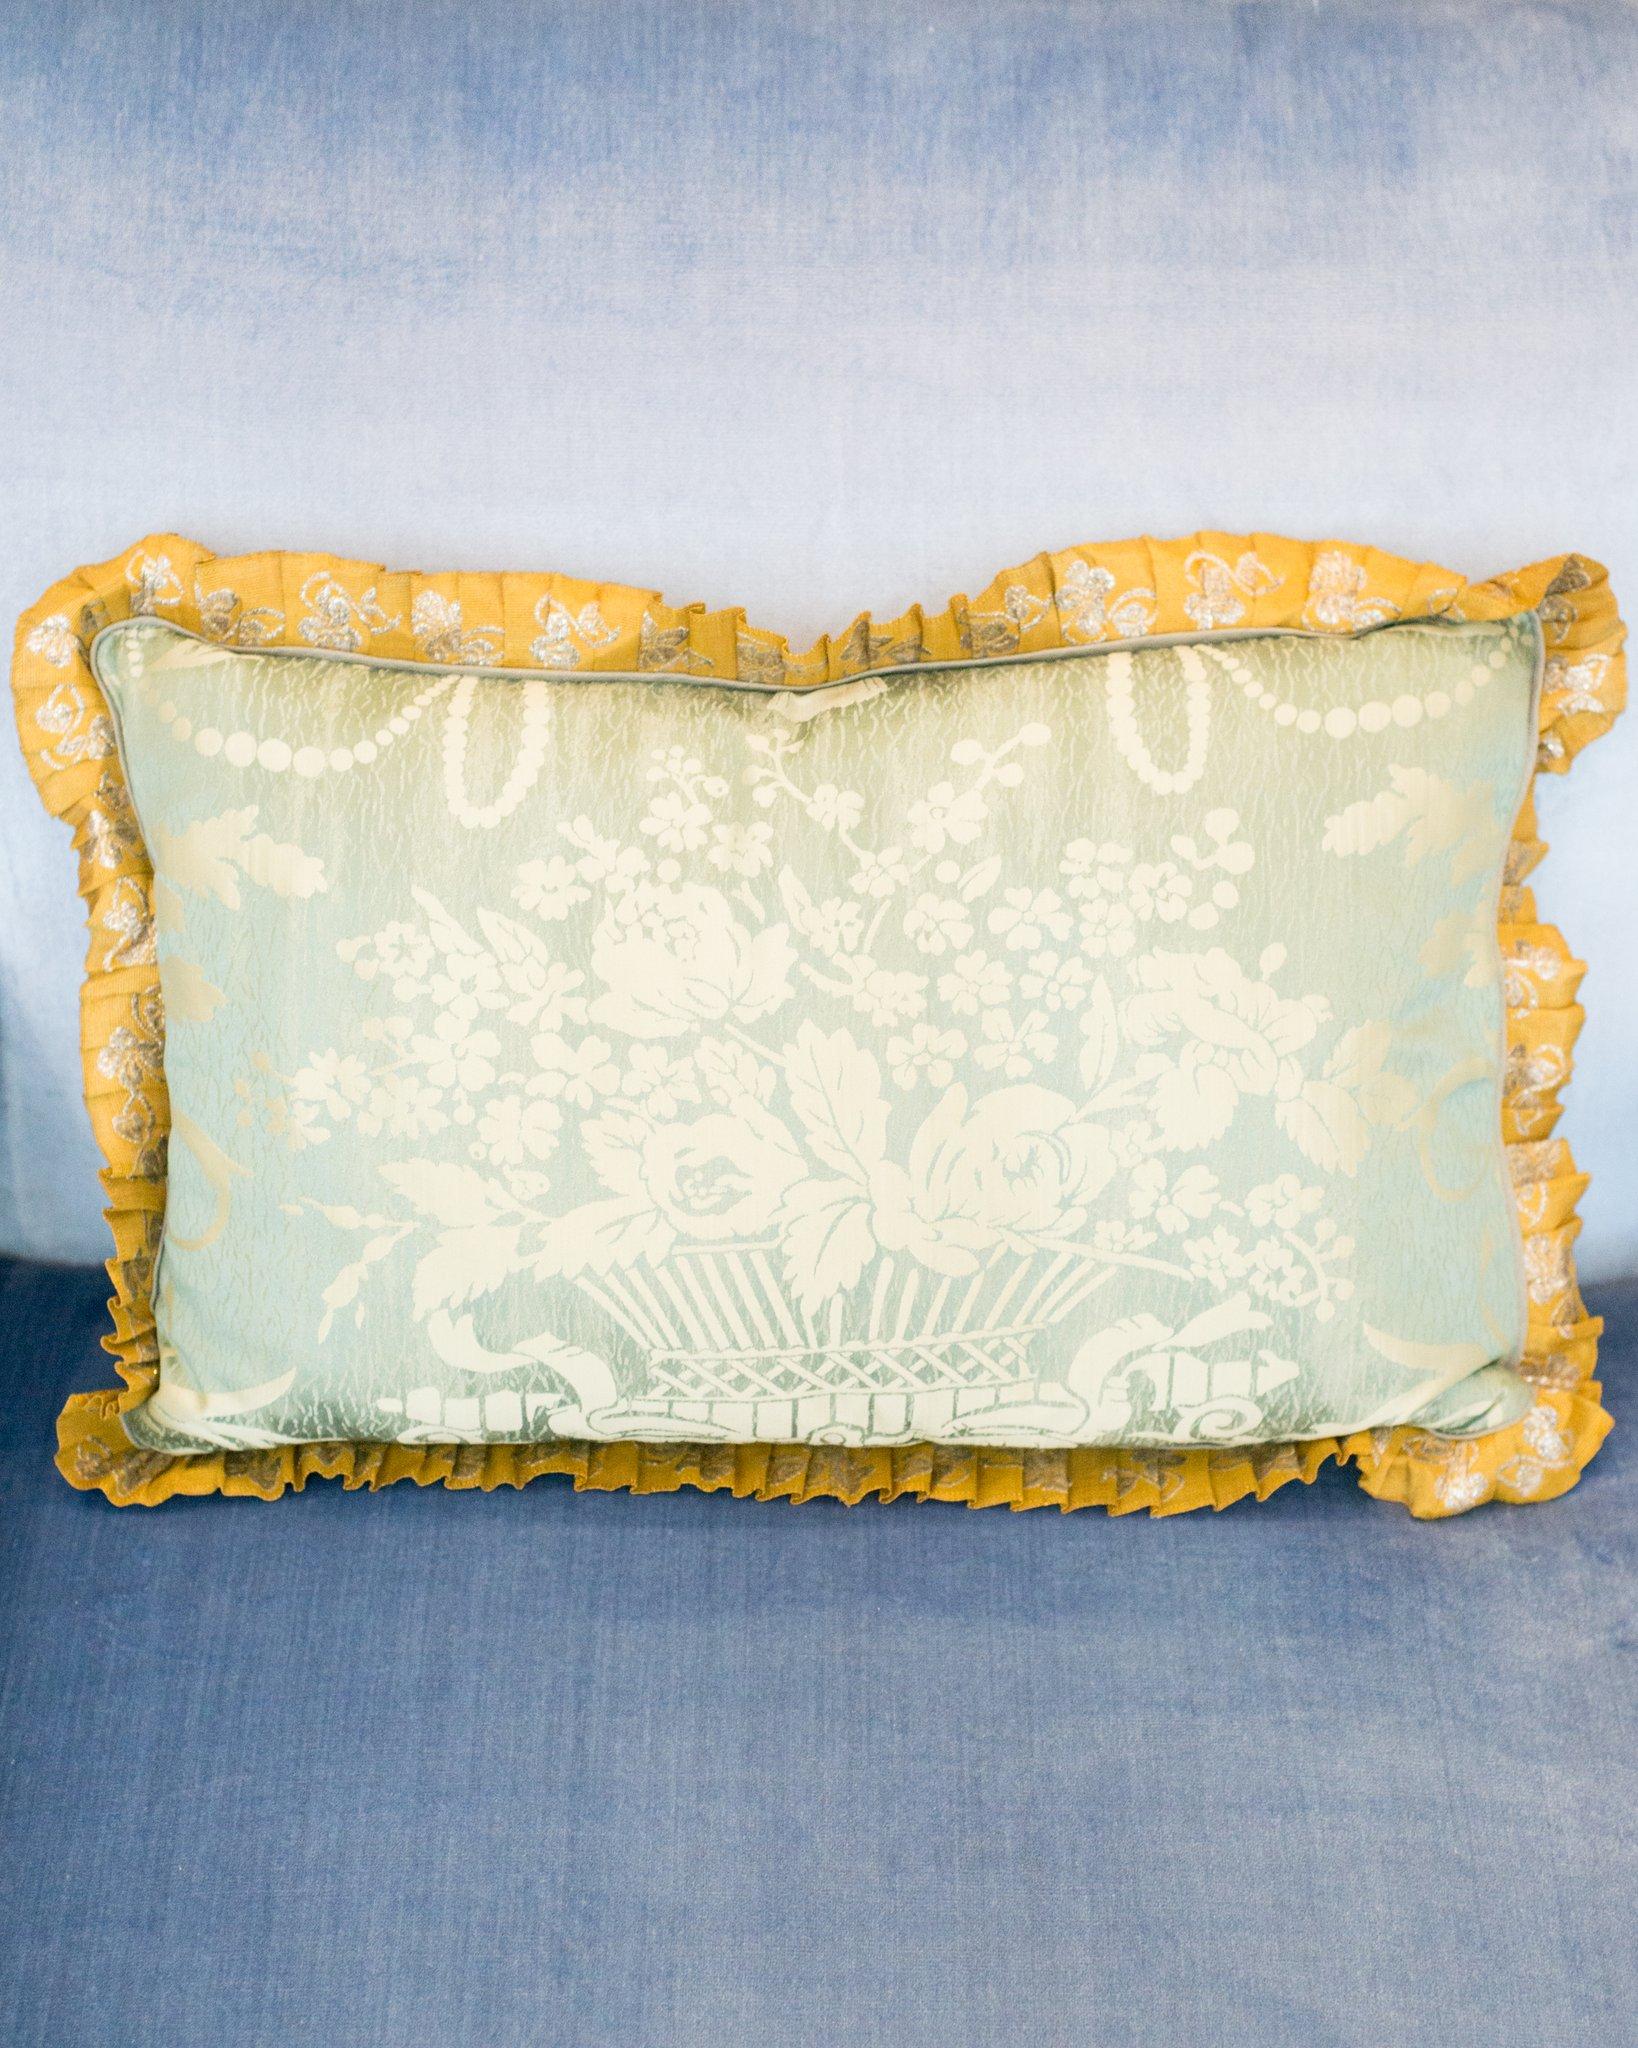 A beautiful pair of asymmetric pale blue damask silk pillows with metallic lace border and linen backing. Filled with 100% Canadian Down and Feather insert.